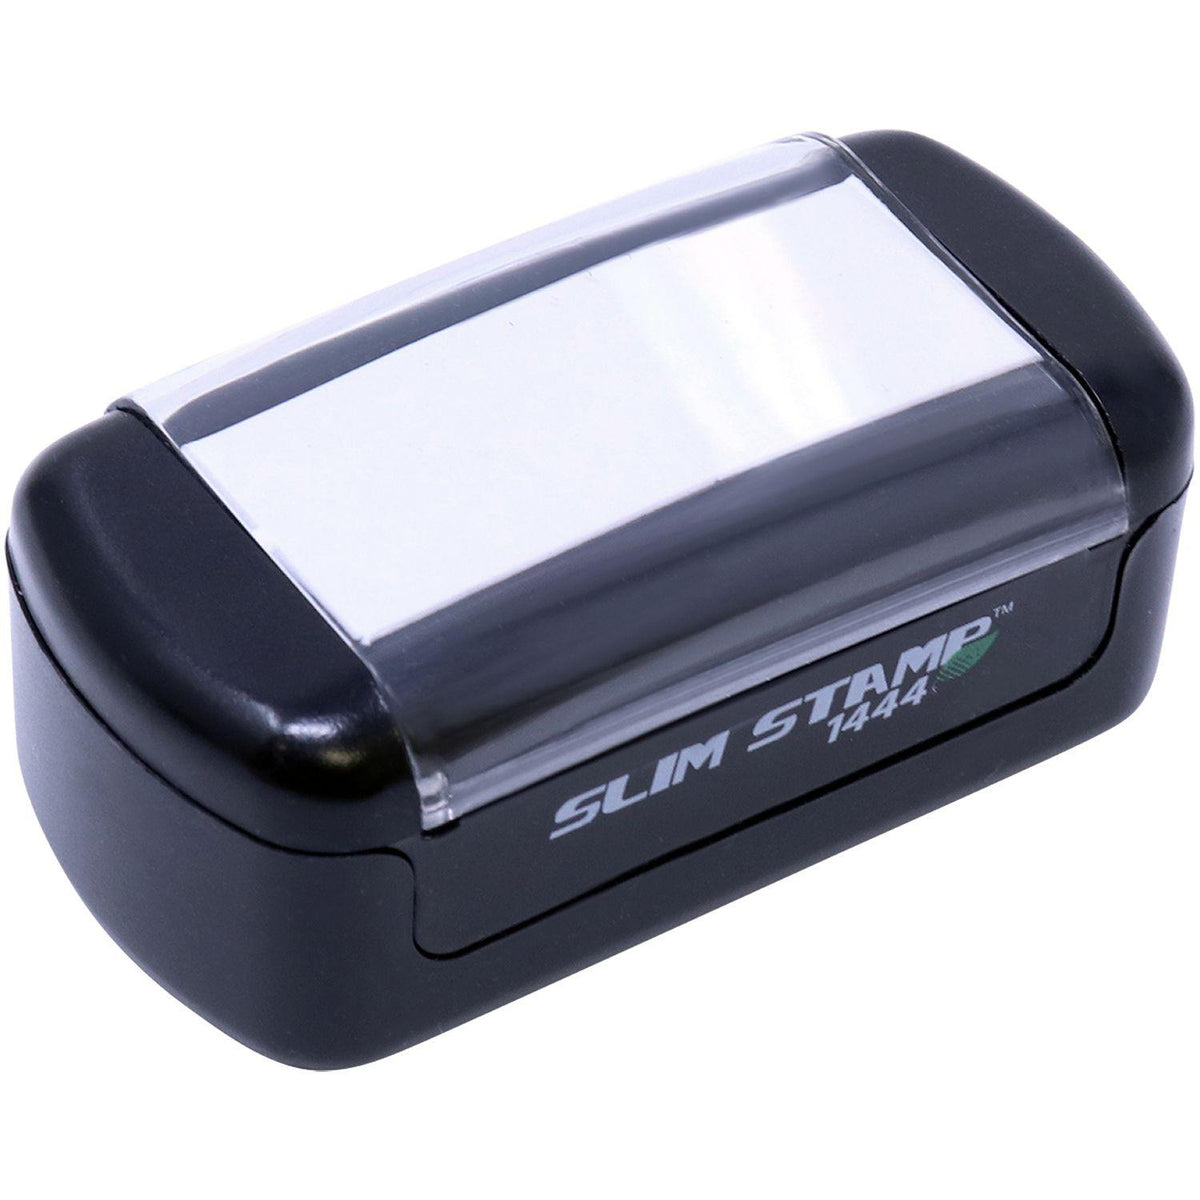 Slim Pre-Inked Bold FYI Stamp - Engineer Seal Stamps - Brand_Slim, Impression Size_Small, Stamp Type_Pre-Inked Stamp, Type of Use_General, Type of Use_Office